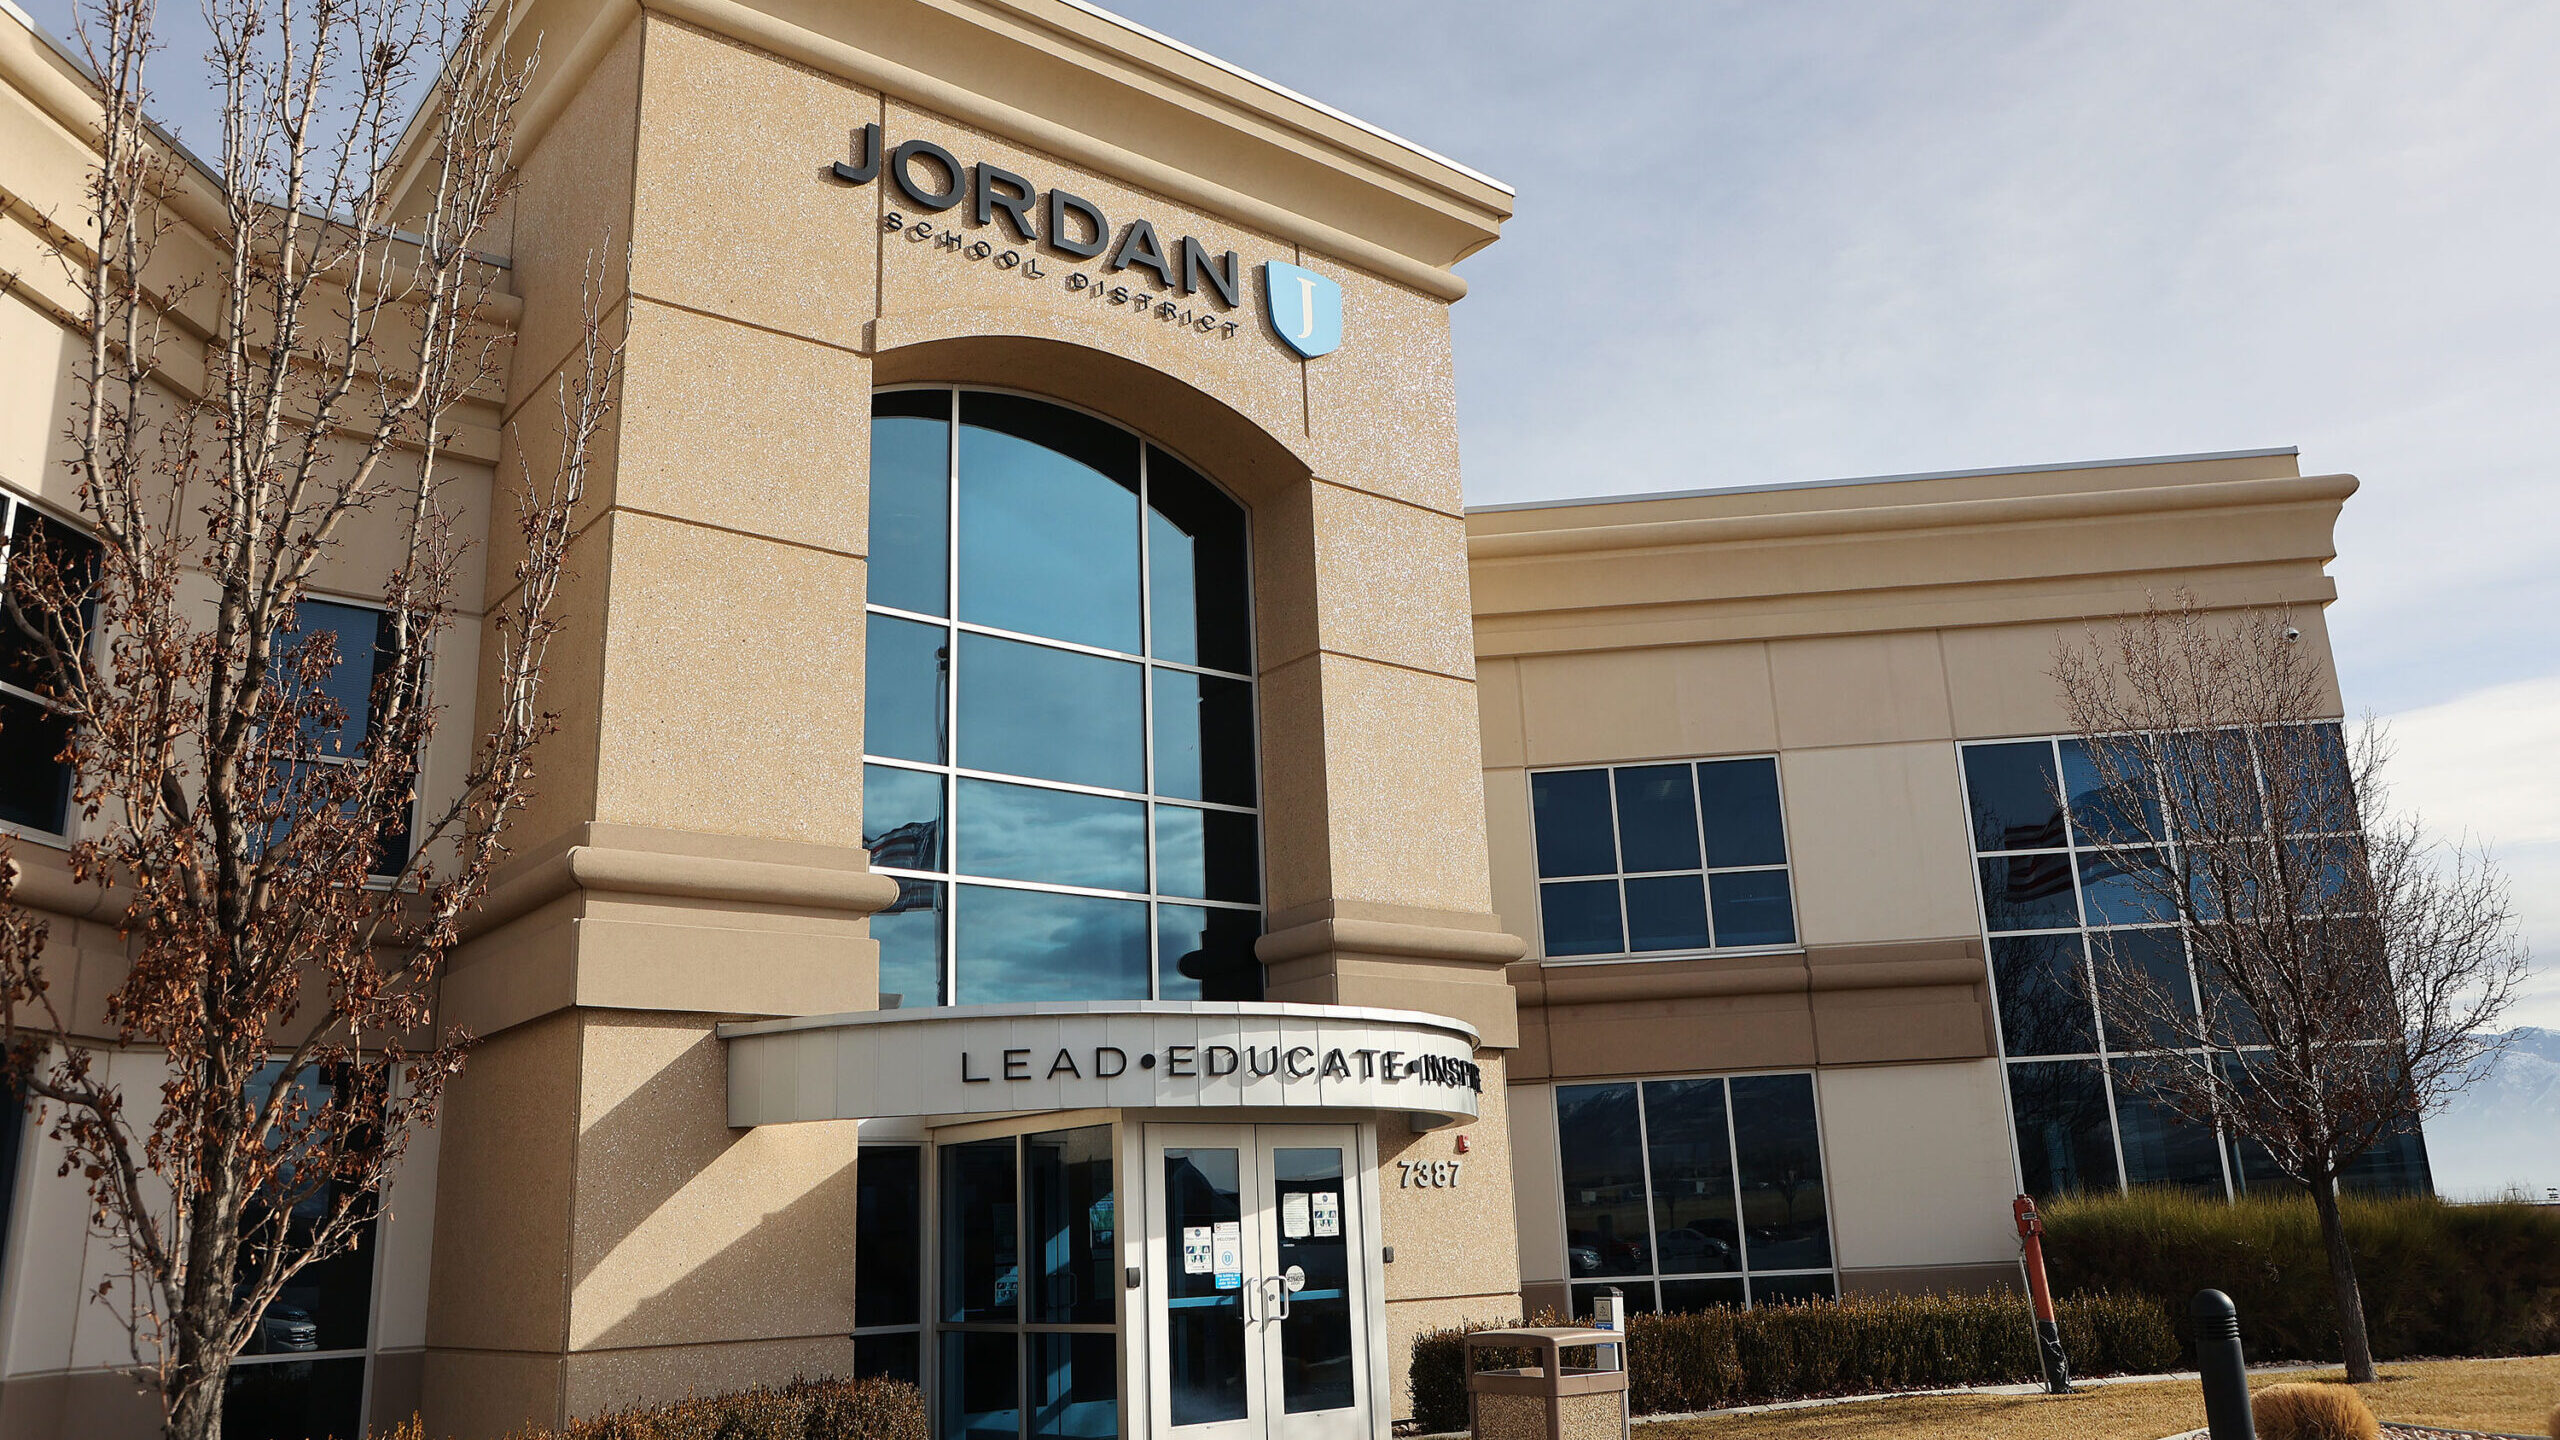 jordan school district building shown, the district will have ai in its schools...